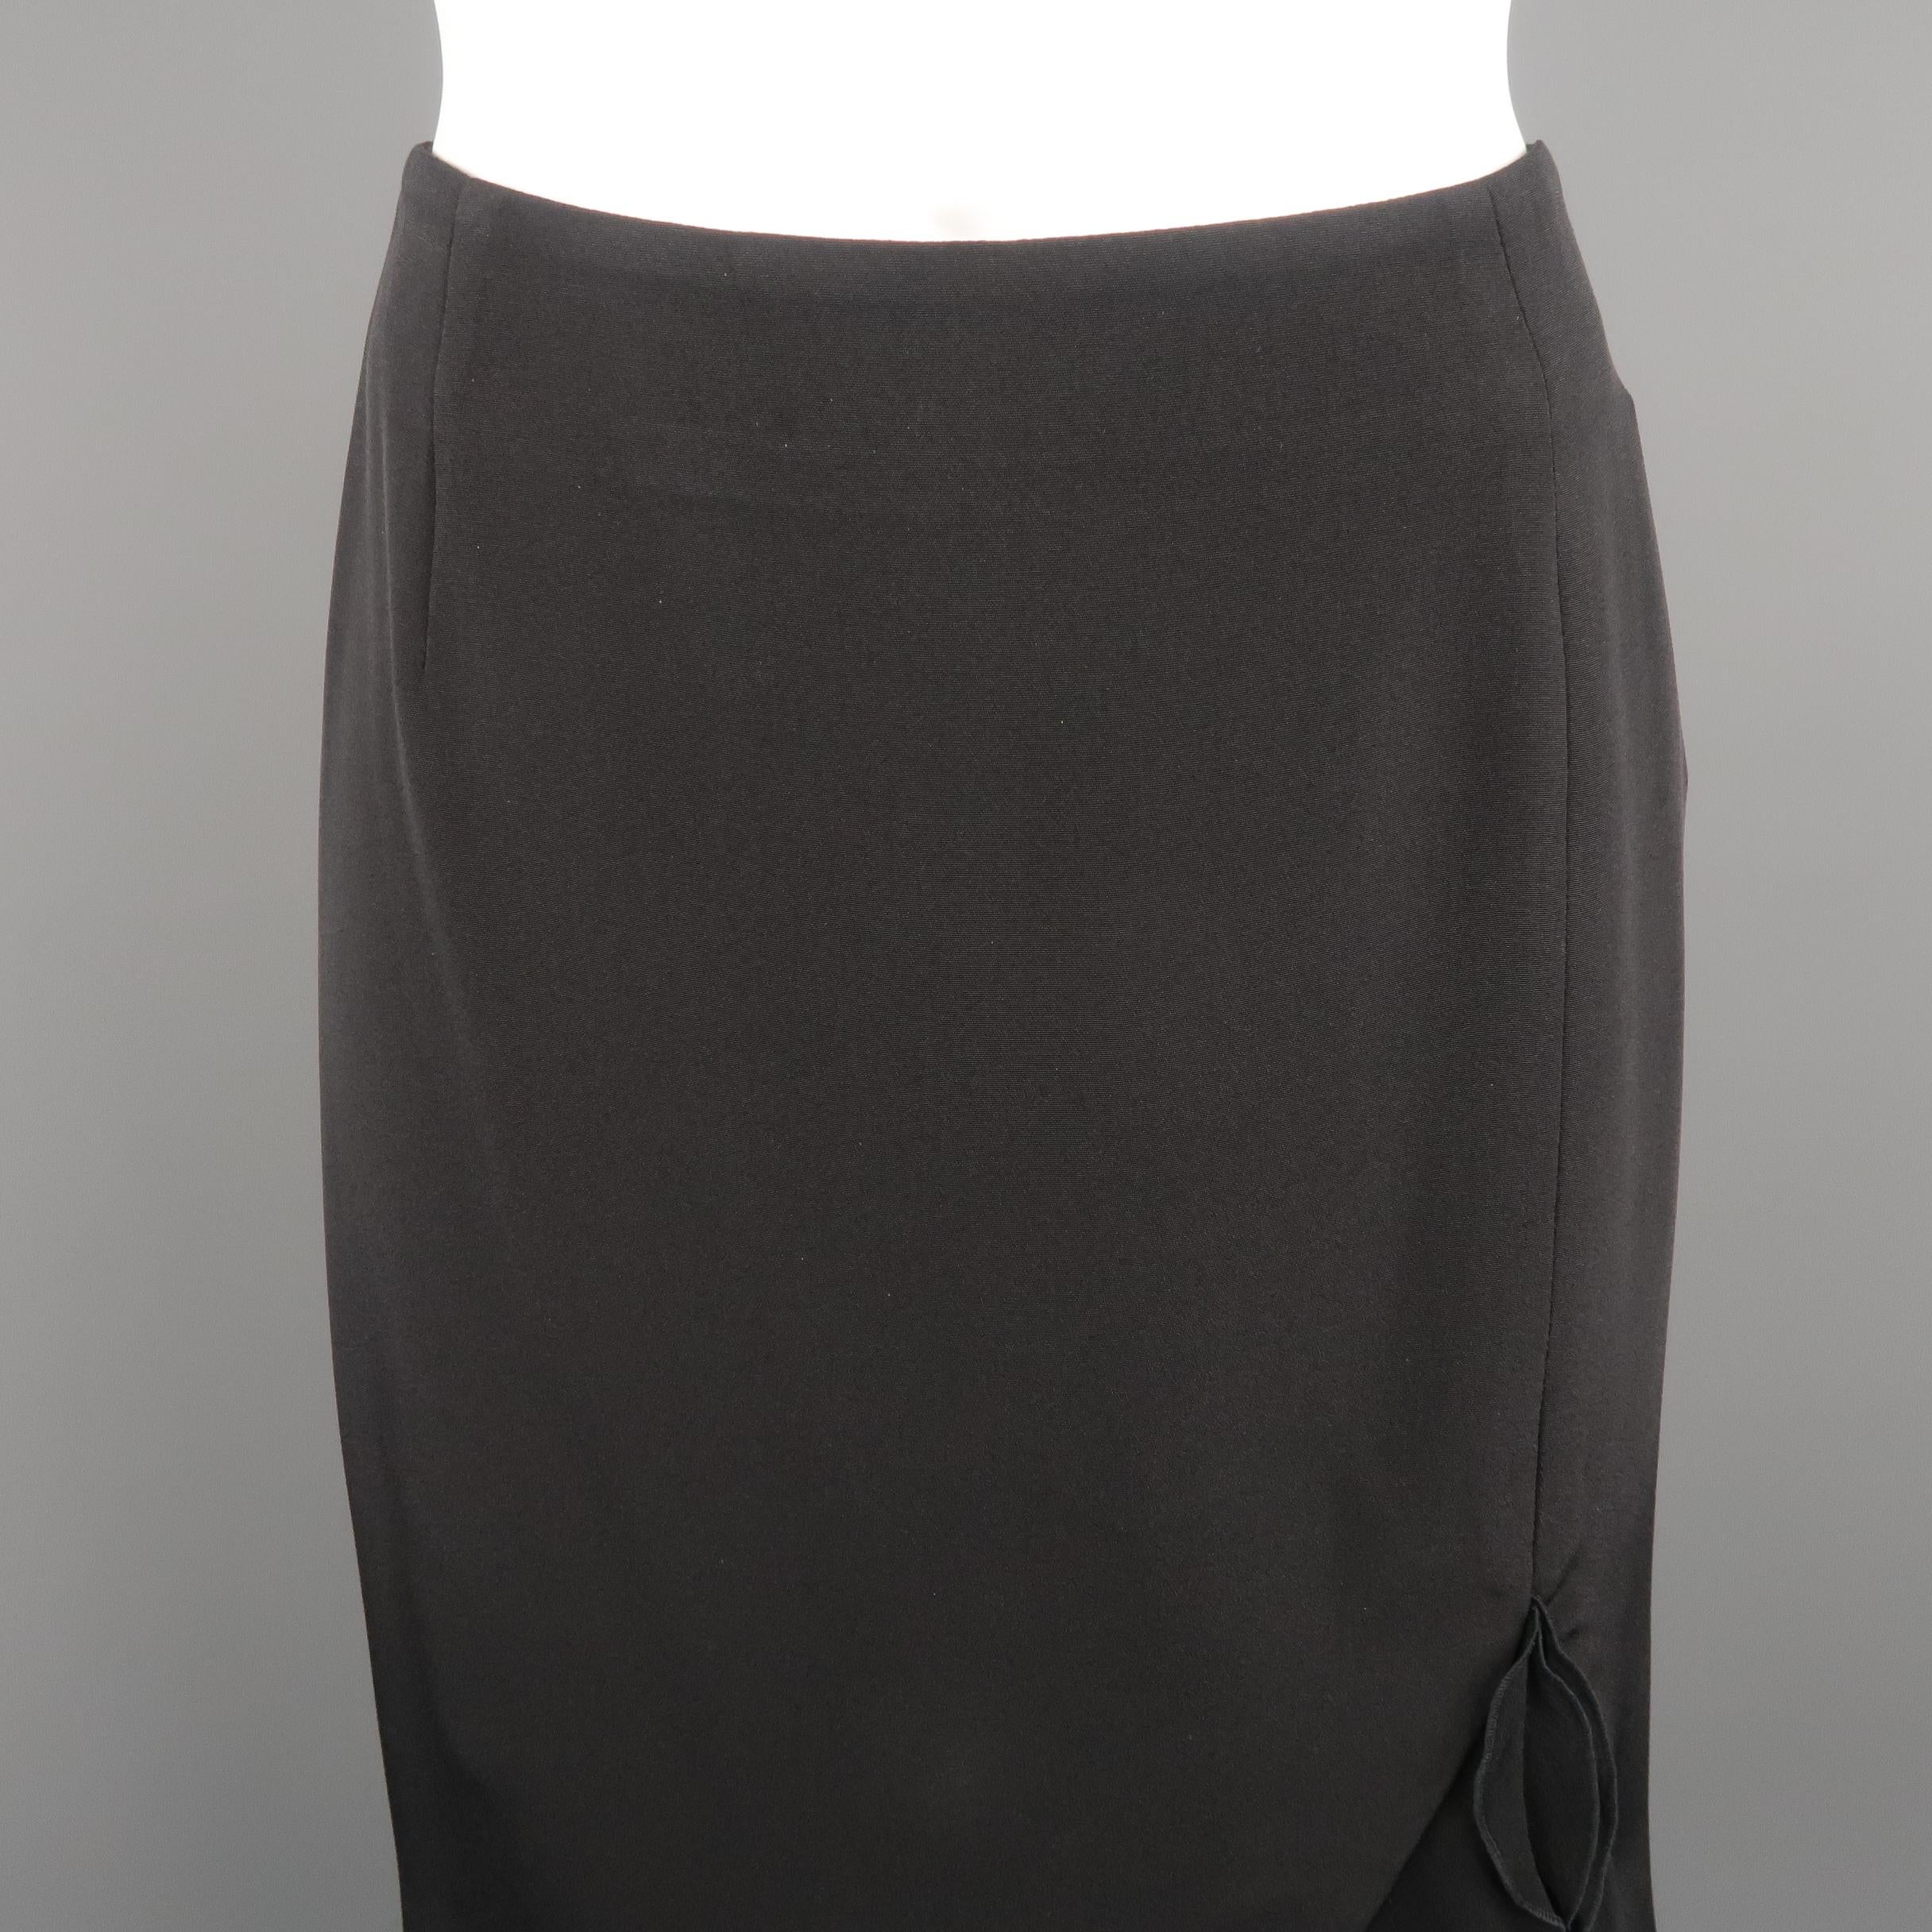 ESCADA classic A-line skirt, come in black tone in silk crepe material, with ruffled hem and lateral zipper. Small signal of use, with a light mark on the ruffle on the right back, needs to be dry cleaned. Made in Germany.
 
Excellent Pre-Owned